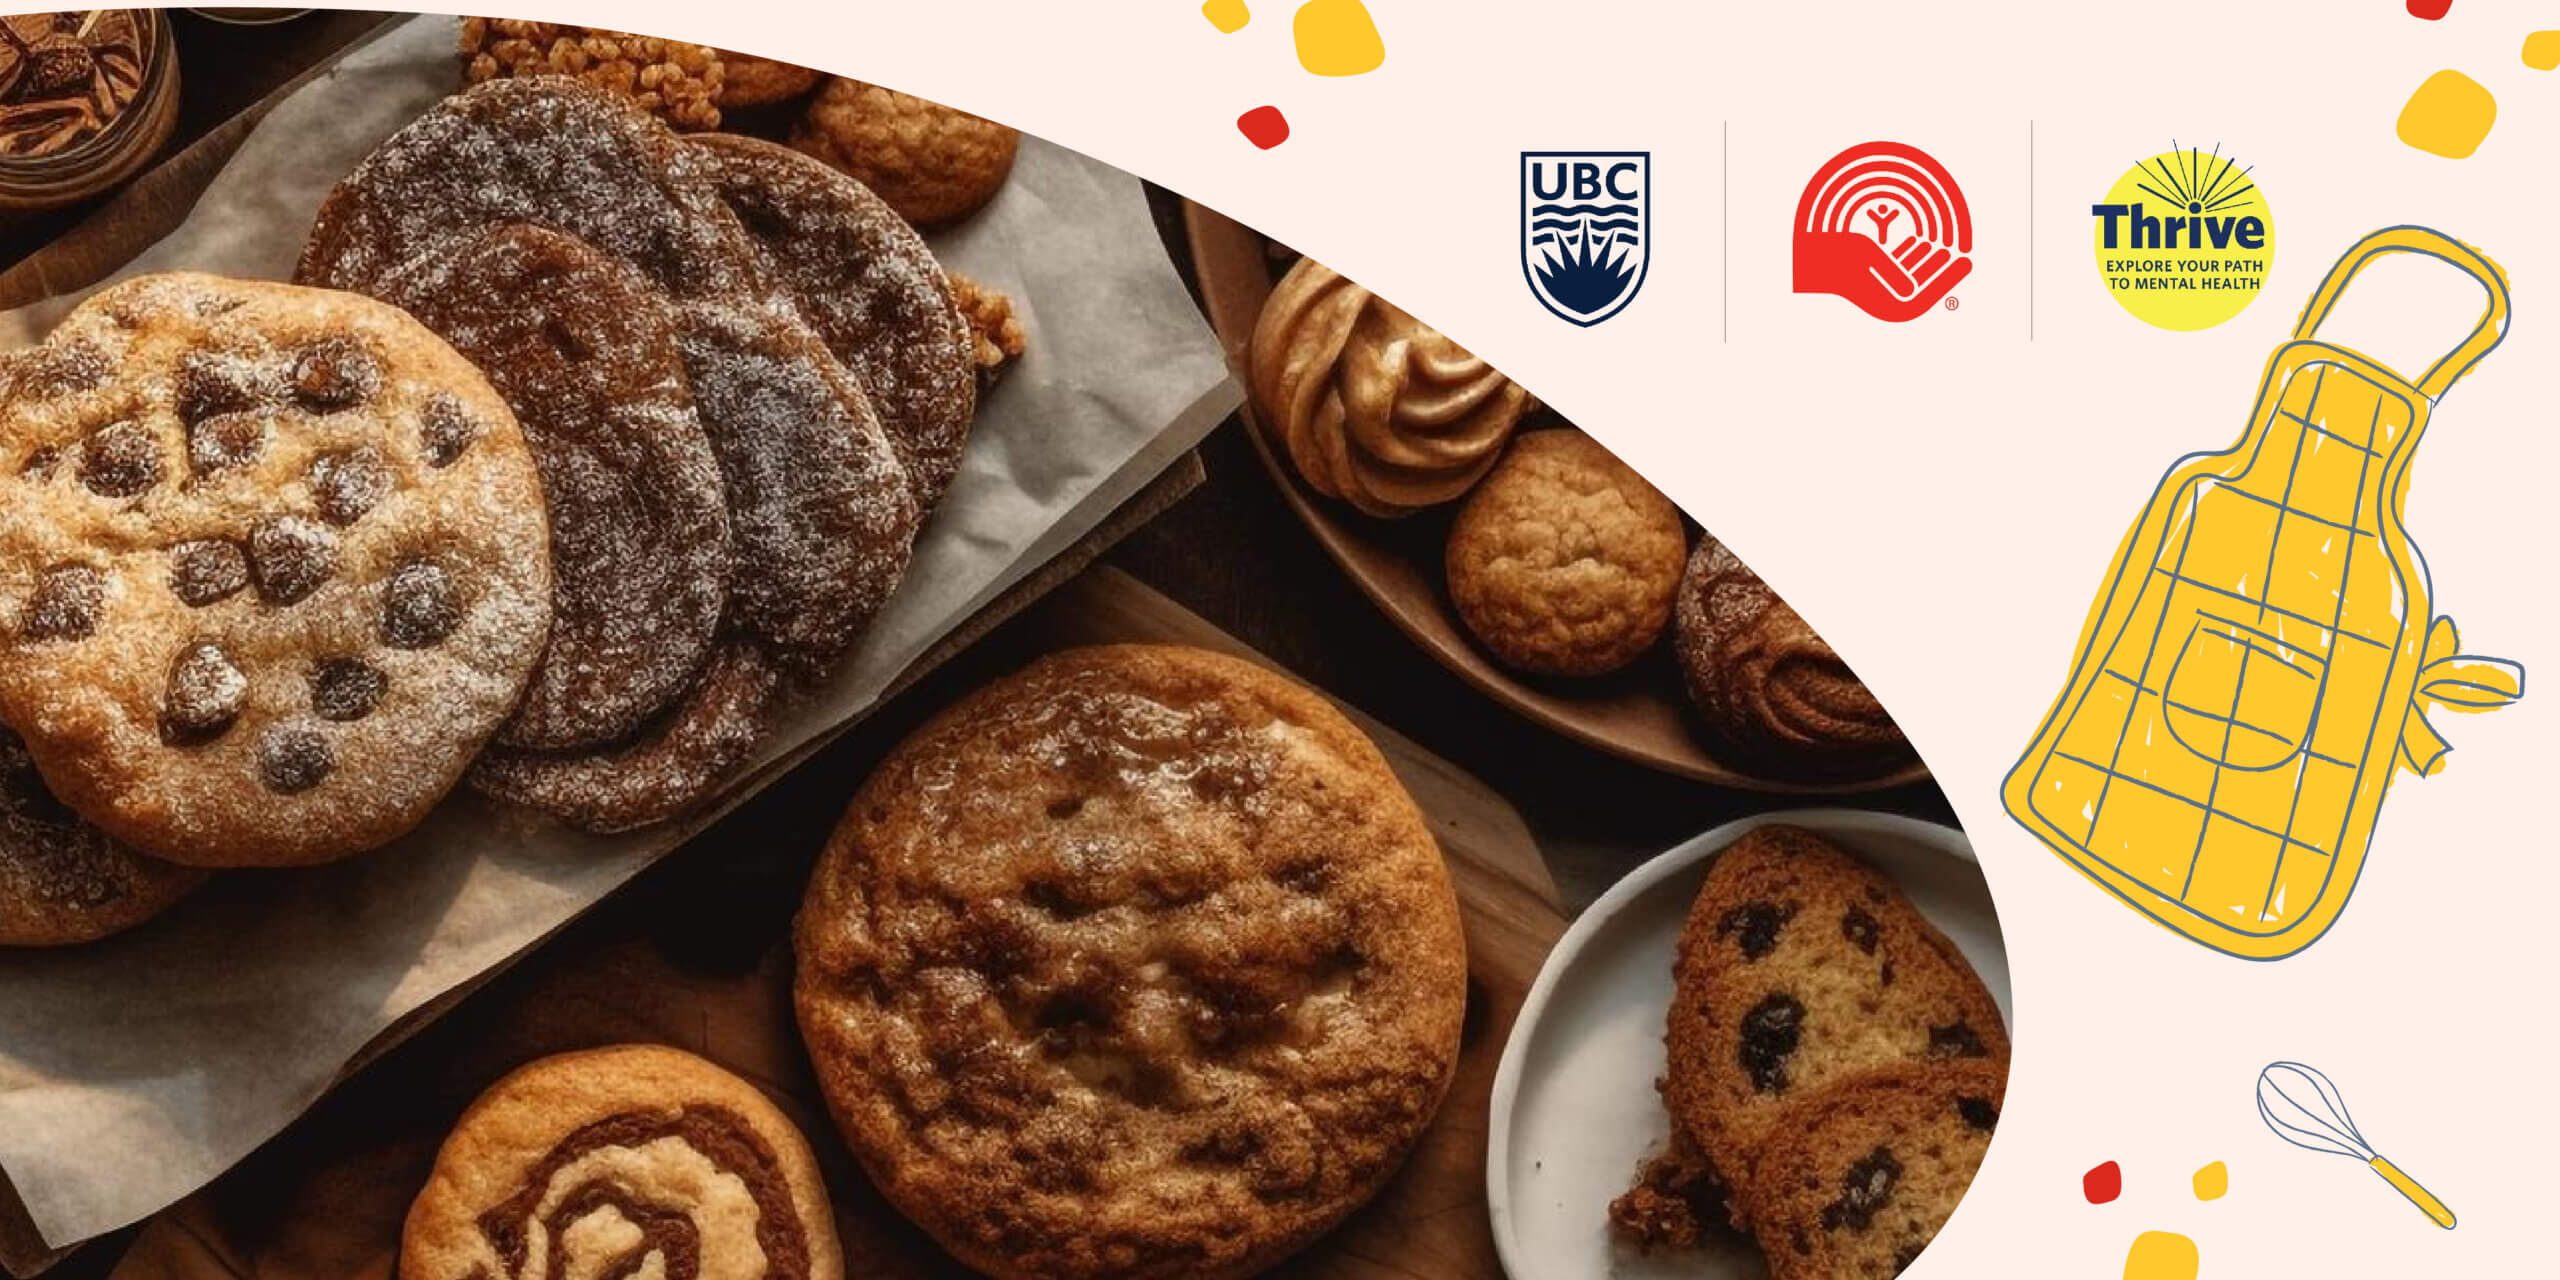 Delectable cookies, muffins and cinnamon swirls highlighted in an oval on the left. Oval surrounded by whimsical illustrations of a yellow apron, a whisk and a rolling pin on a pale pink background. Small UBC, United Way and Thrive logos lined up on the top right of banner.